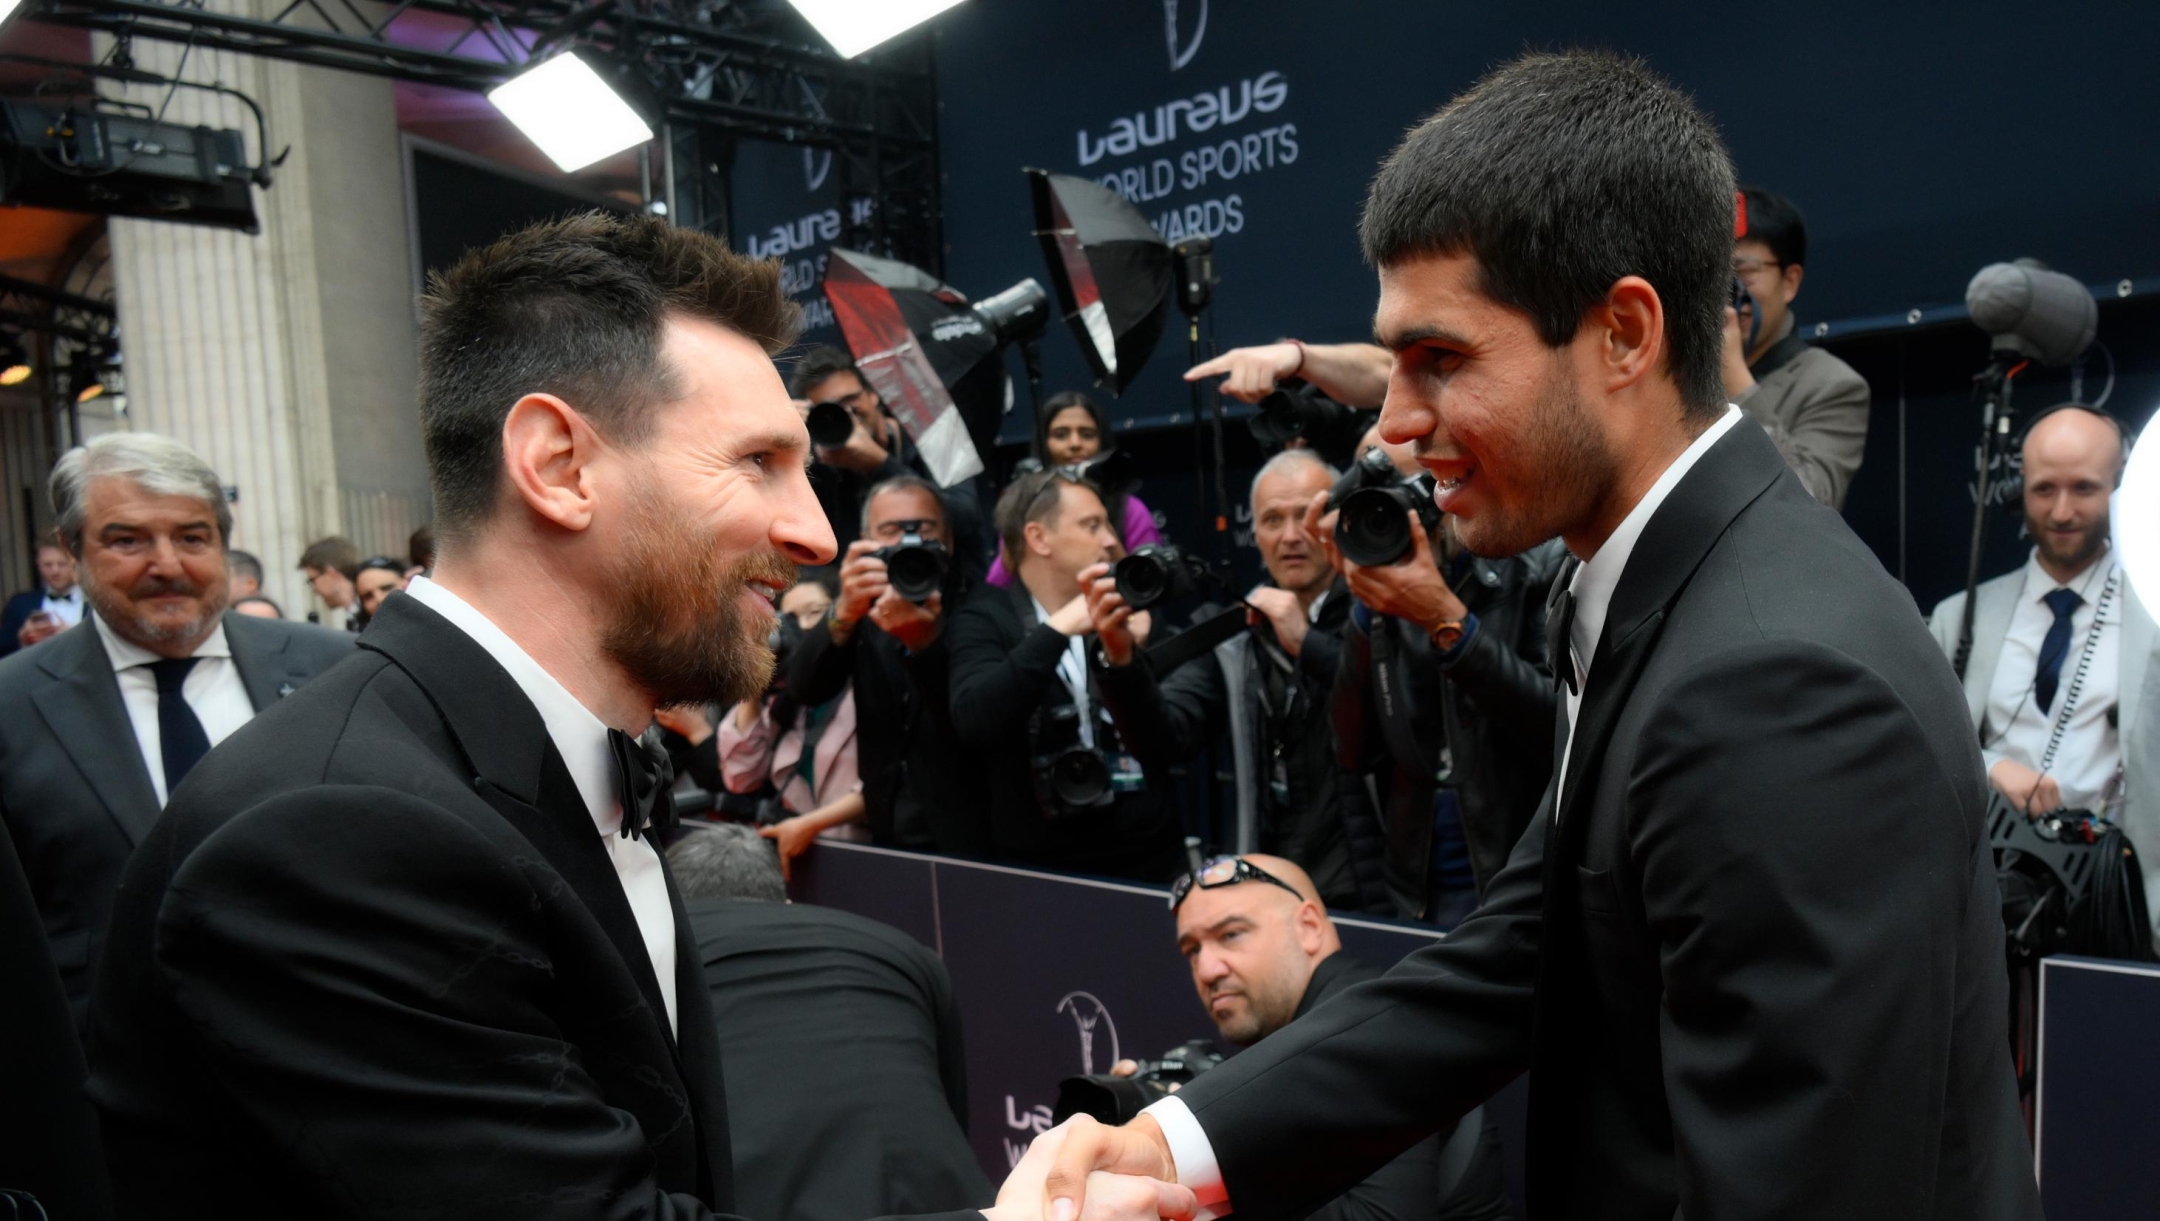 PARIS, FRANCE - MAY 08: Carlos Alcaraz speaks with Lionel Messi as they arrive at the 2023 Laureus World Sport Awards Paris red carpet arrivals at Cour Vendome on May 08, 2023 in Paris, France. (Photo by Kristy Sparow/Getty Images for Laureus)